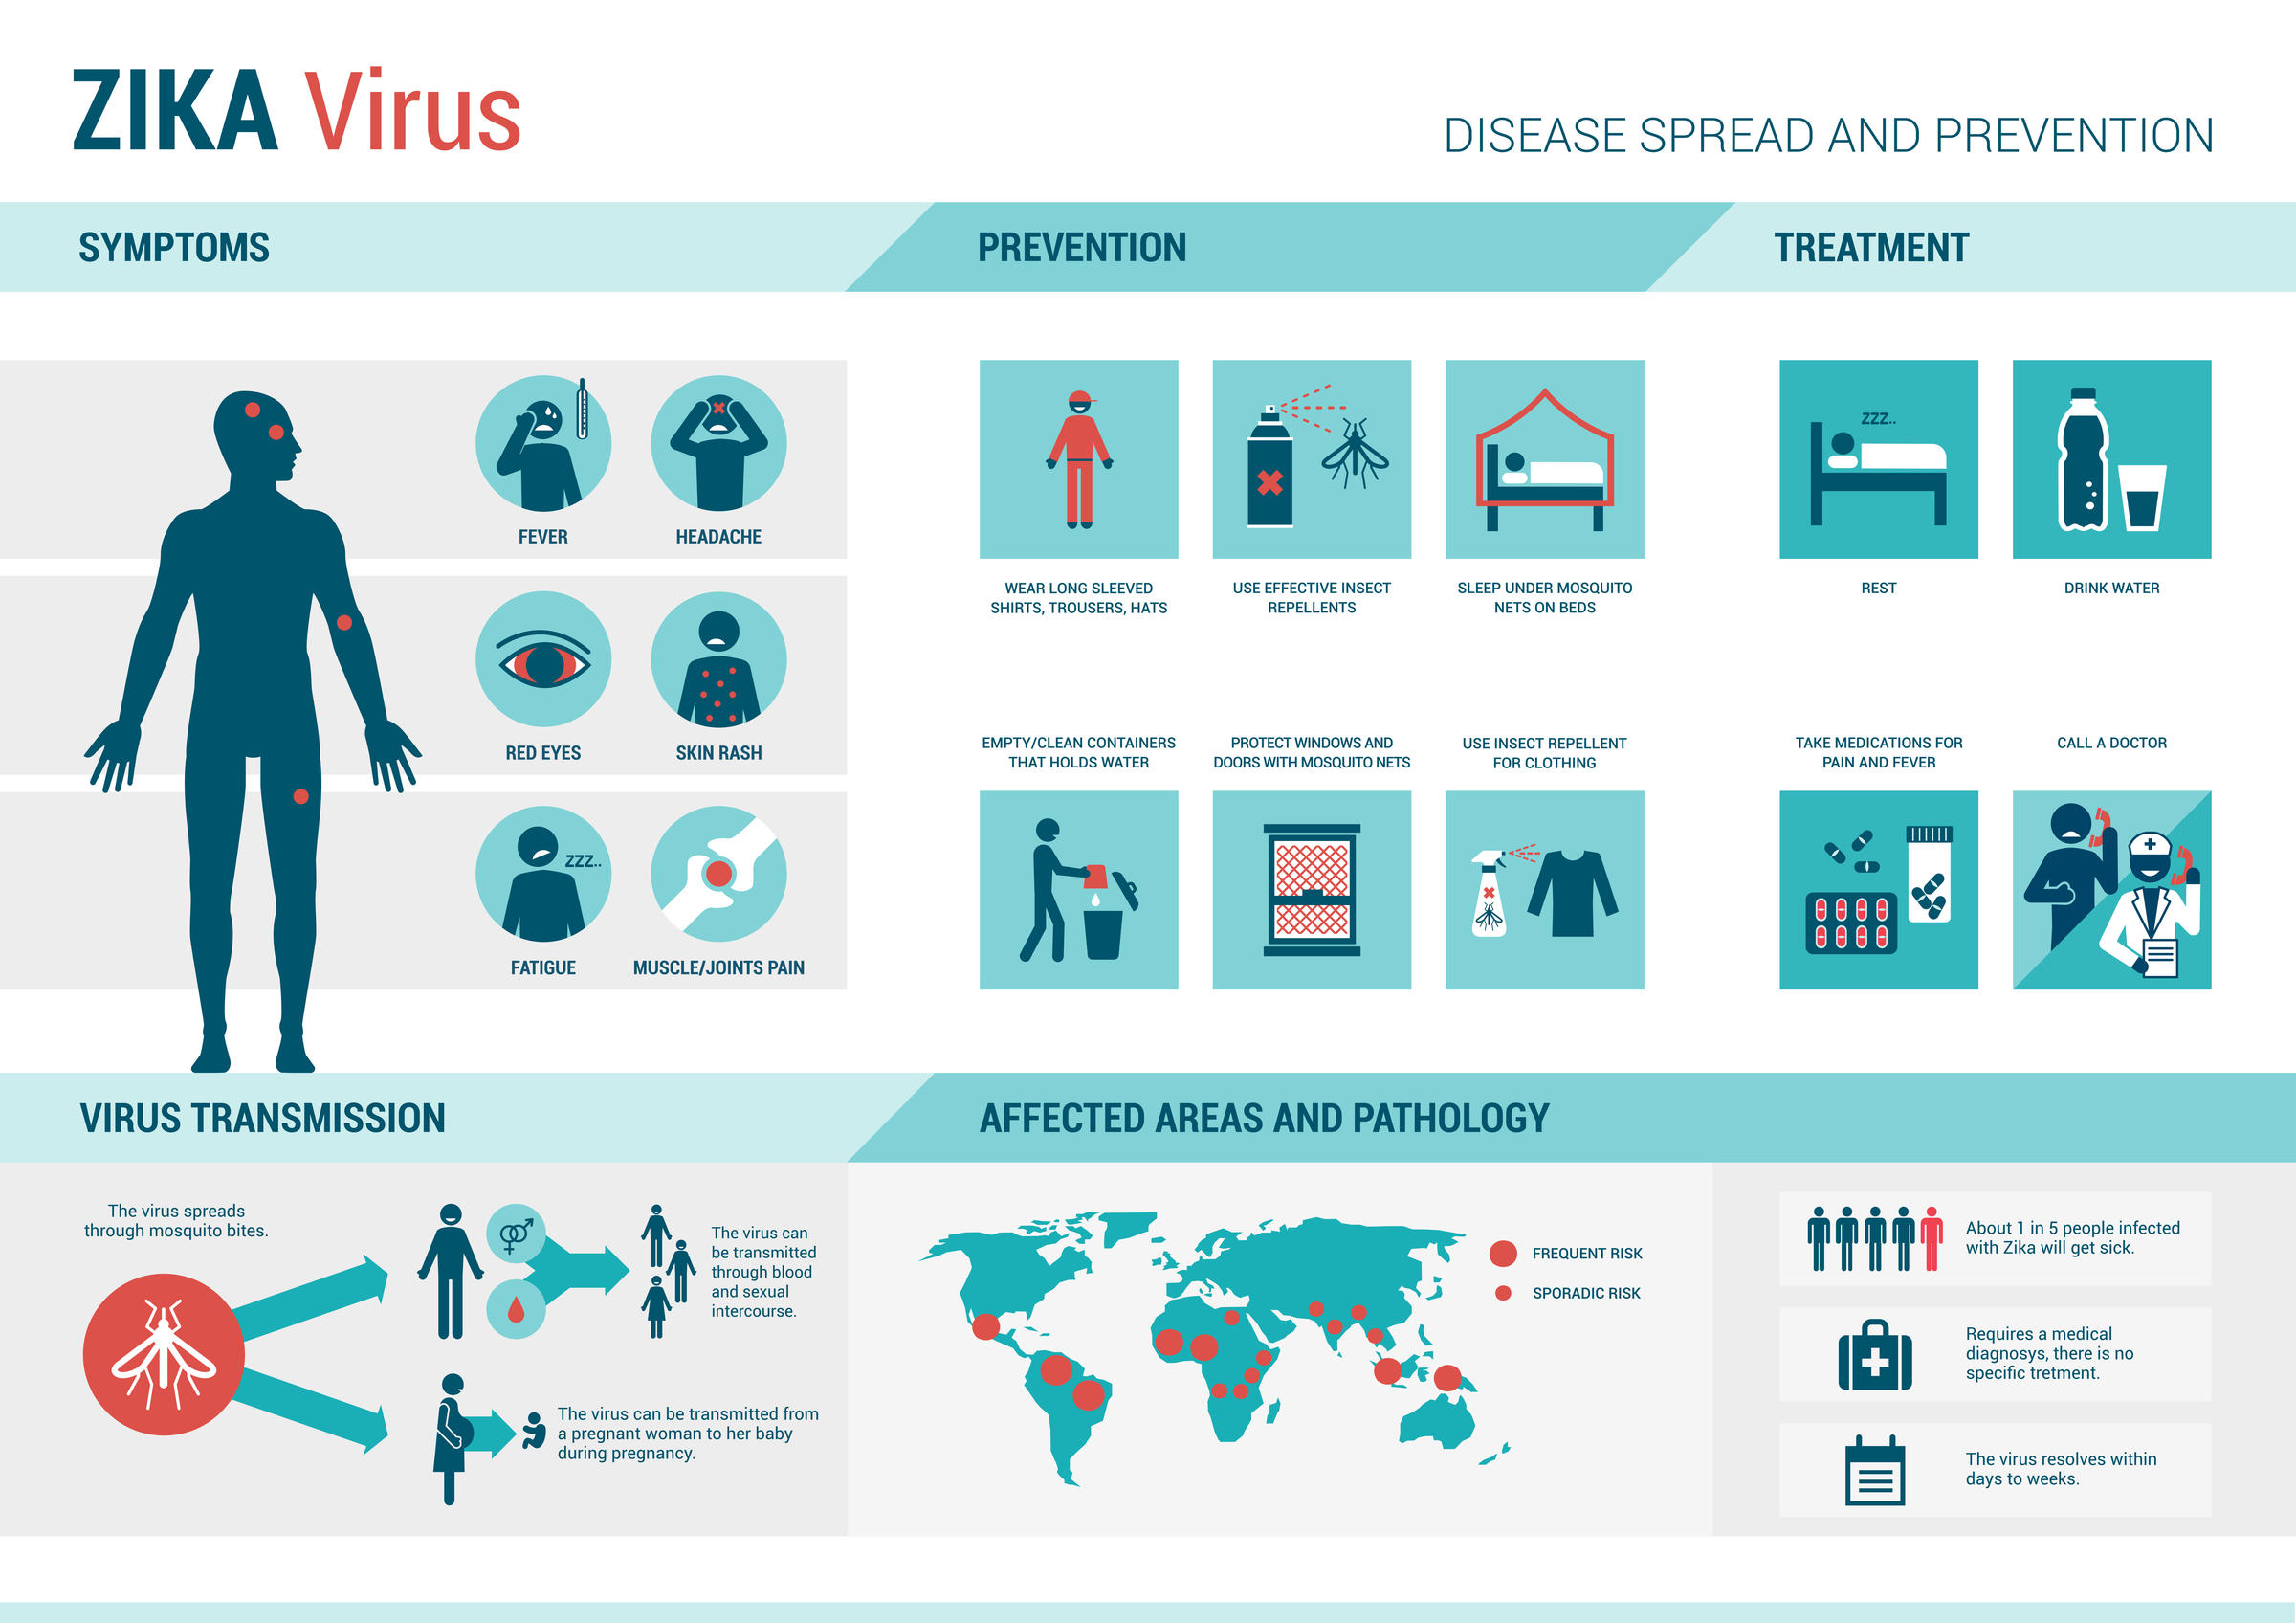 zika virus infographic prevention outbreak symptoms treatment pregnancy health appalachian states international vector concern emergency infographics need advisories issued organization